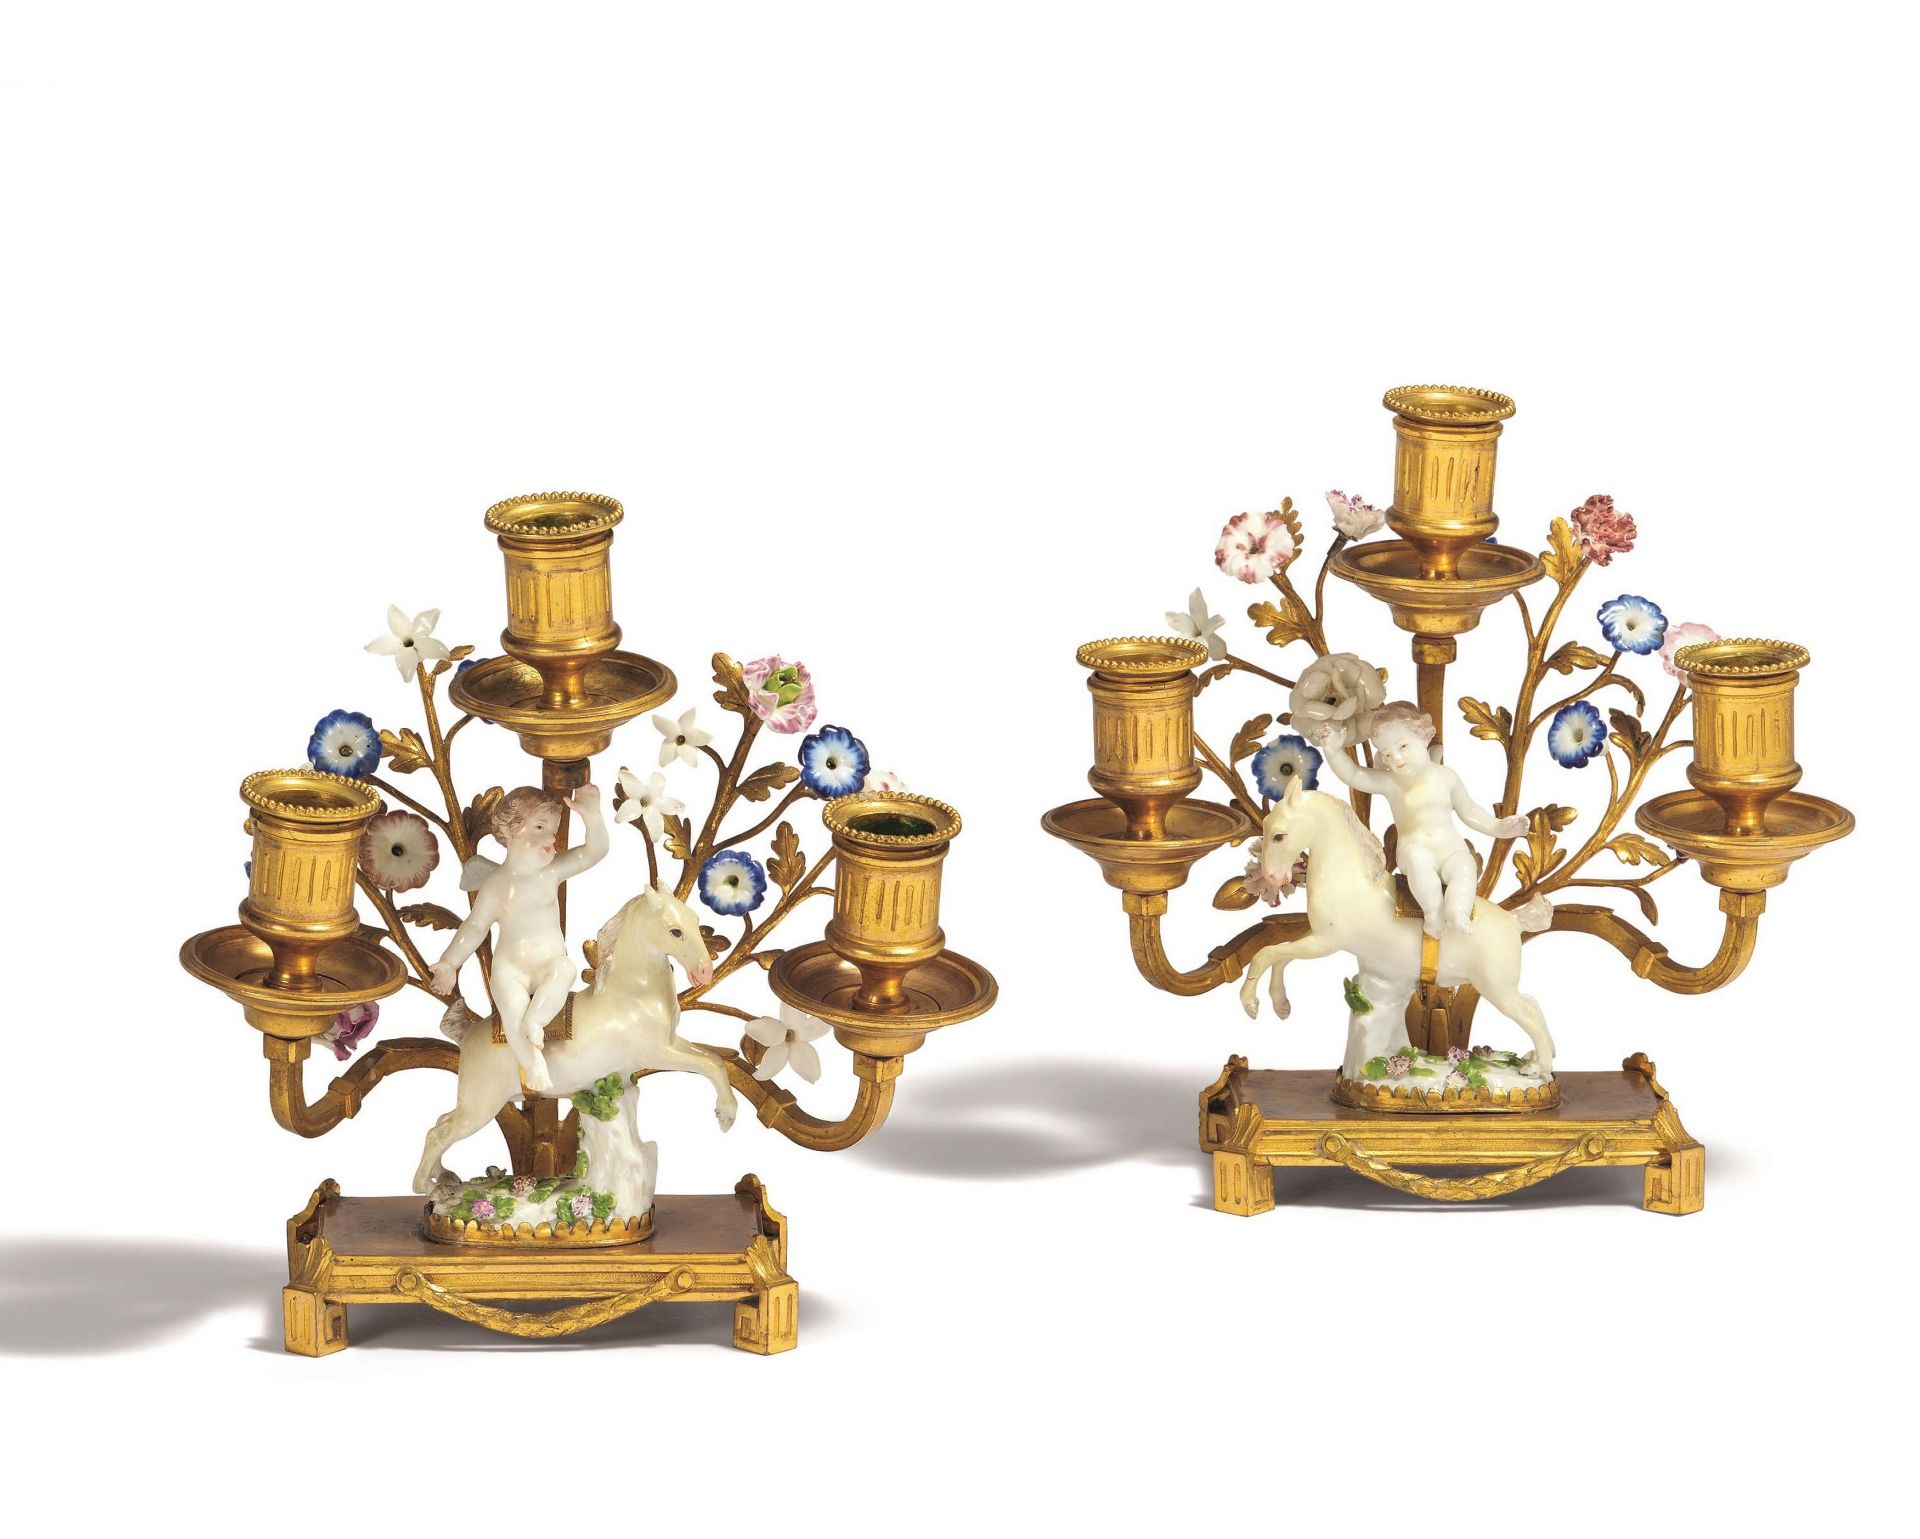 BRONZE PAIR OF THREE-LIGHT CANDLESTICKS WITH CUPIDS RIDING HORSES - Image 2 of 6